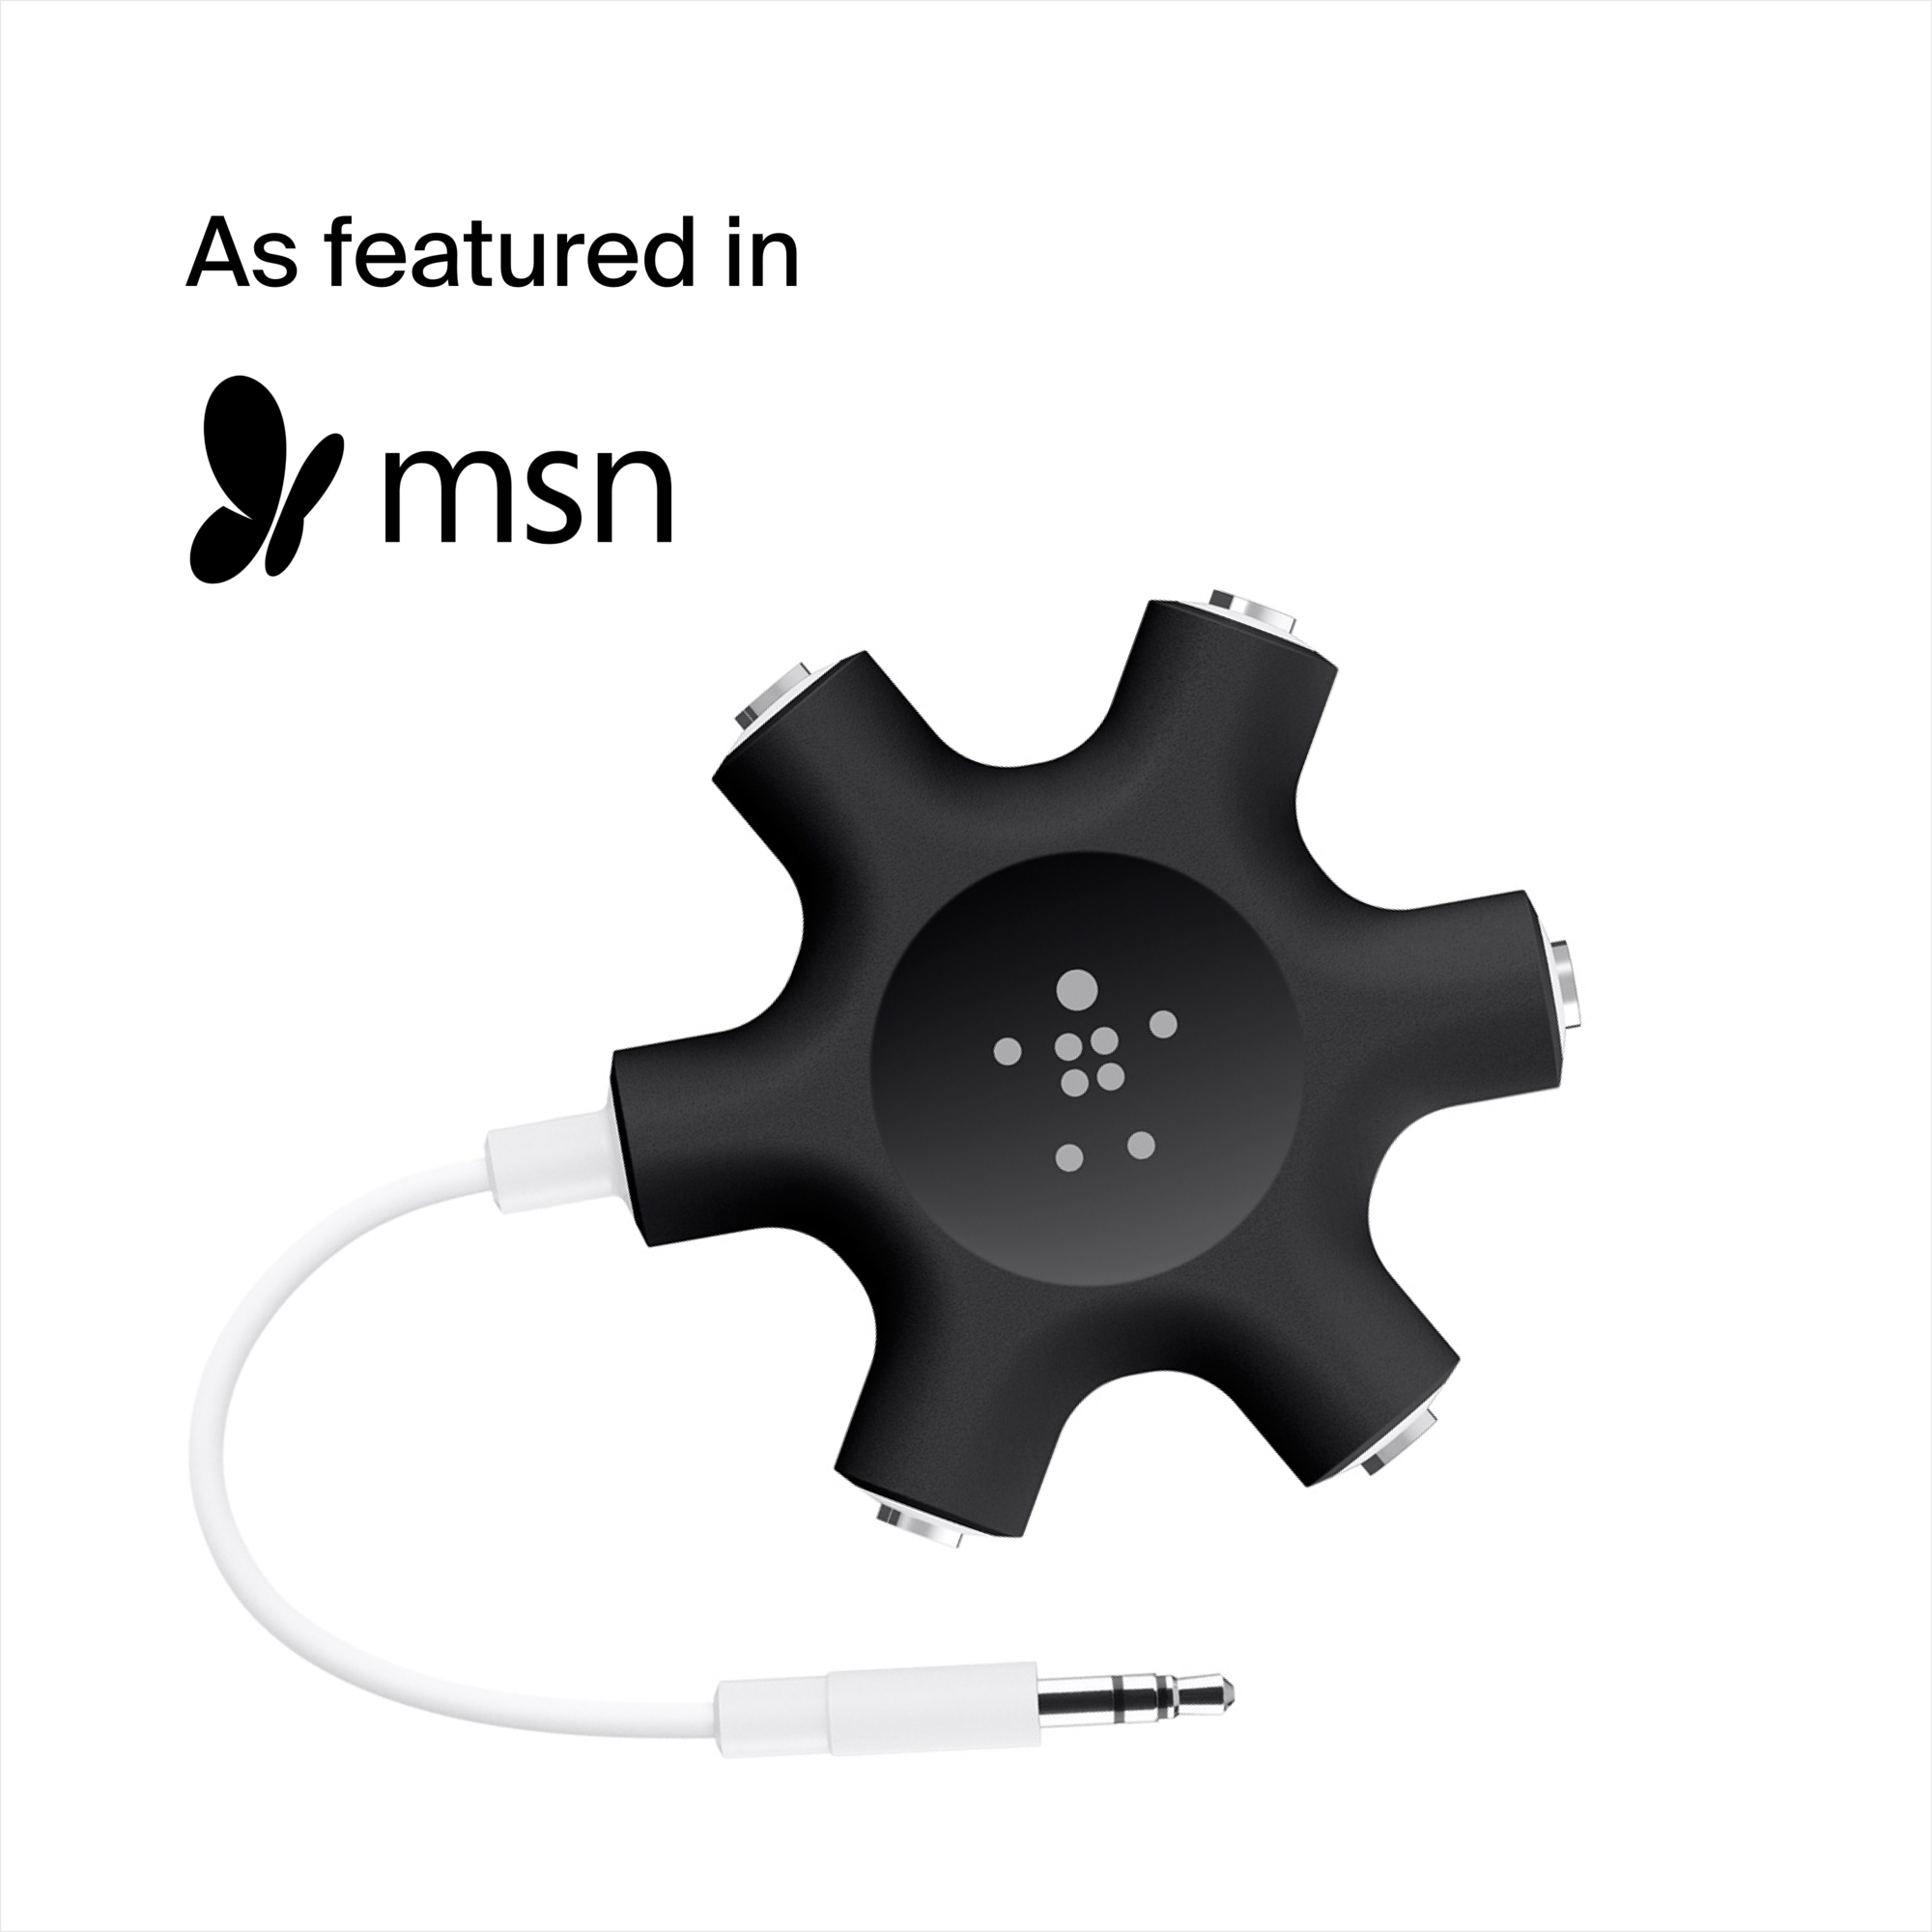 Belkin Rockstar 5-Jack Multi Headphone Audio Splitter - Headphone Splitter Designed To Connect Up To 5 Devices For Classrooms, Audio Mixing & Shared Experiences - For iPhone, iPad & More - image 2 of 5